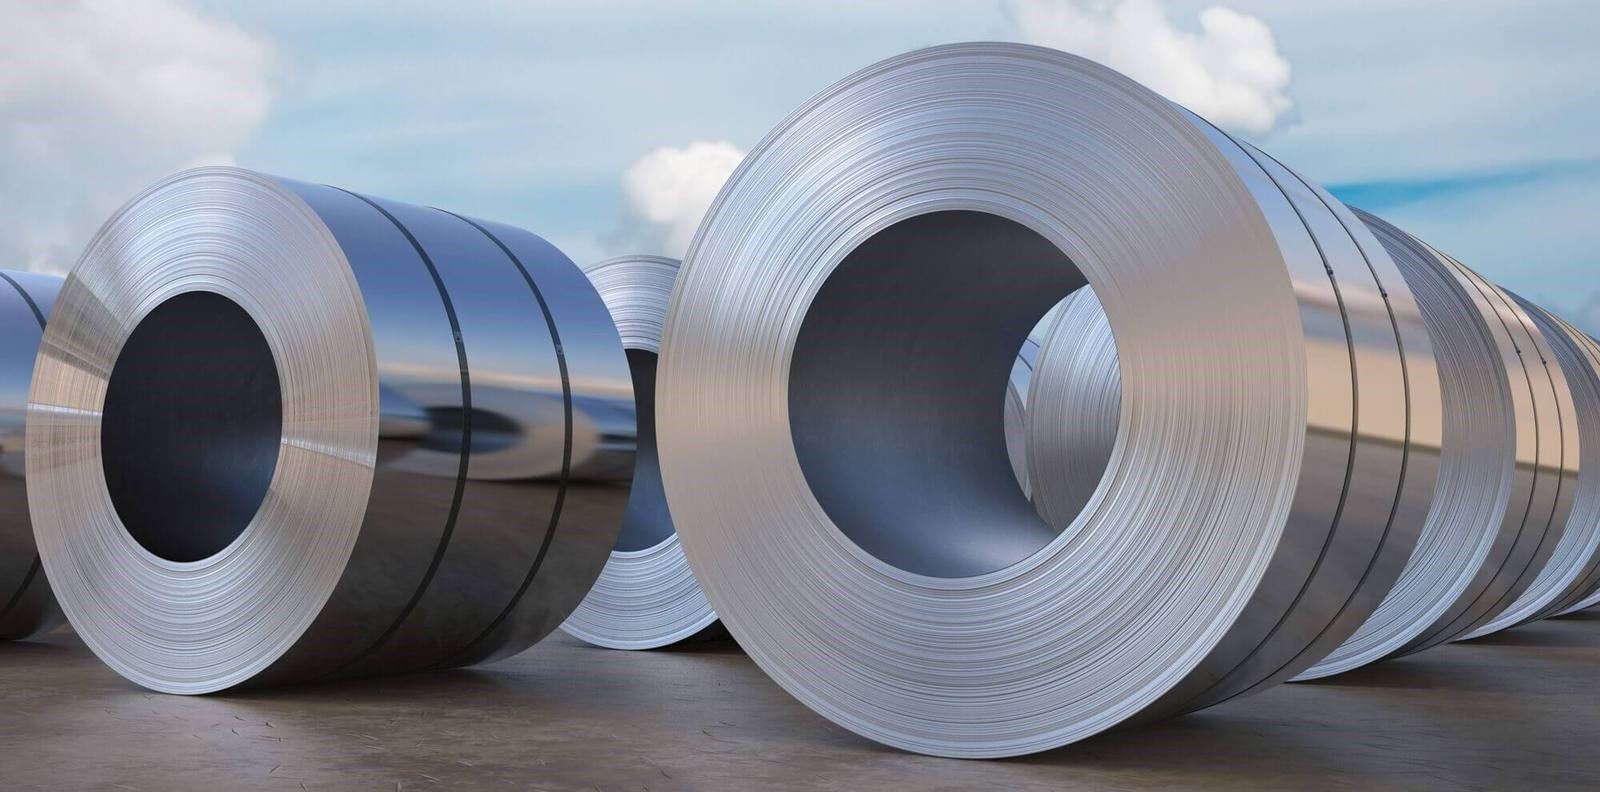 Alloy Strips Market is Estimated to Witness Strong Growth Owing to Rising Demand from Automobile Industry